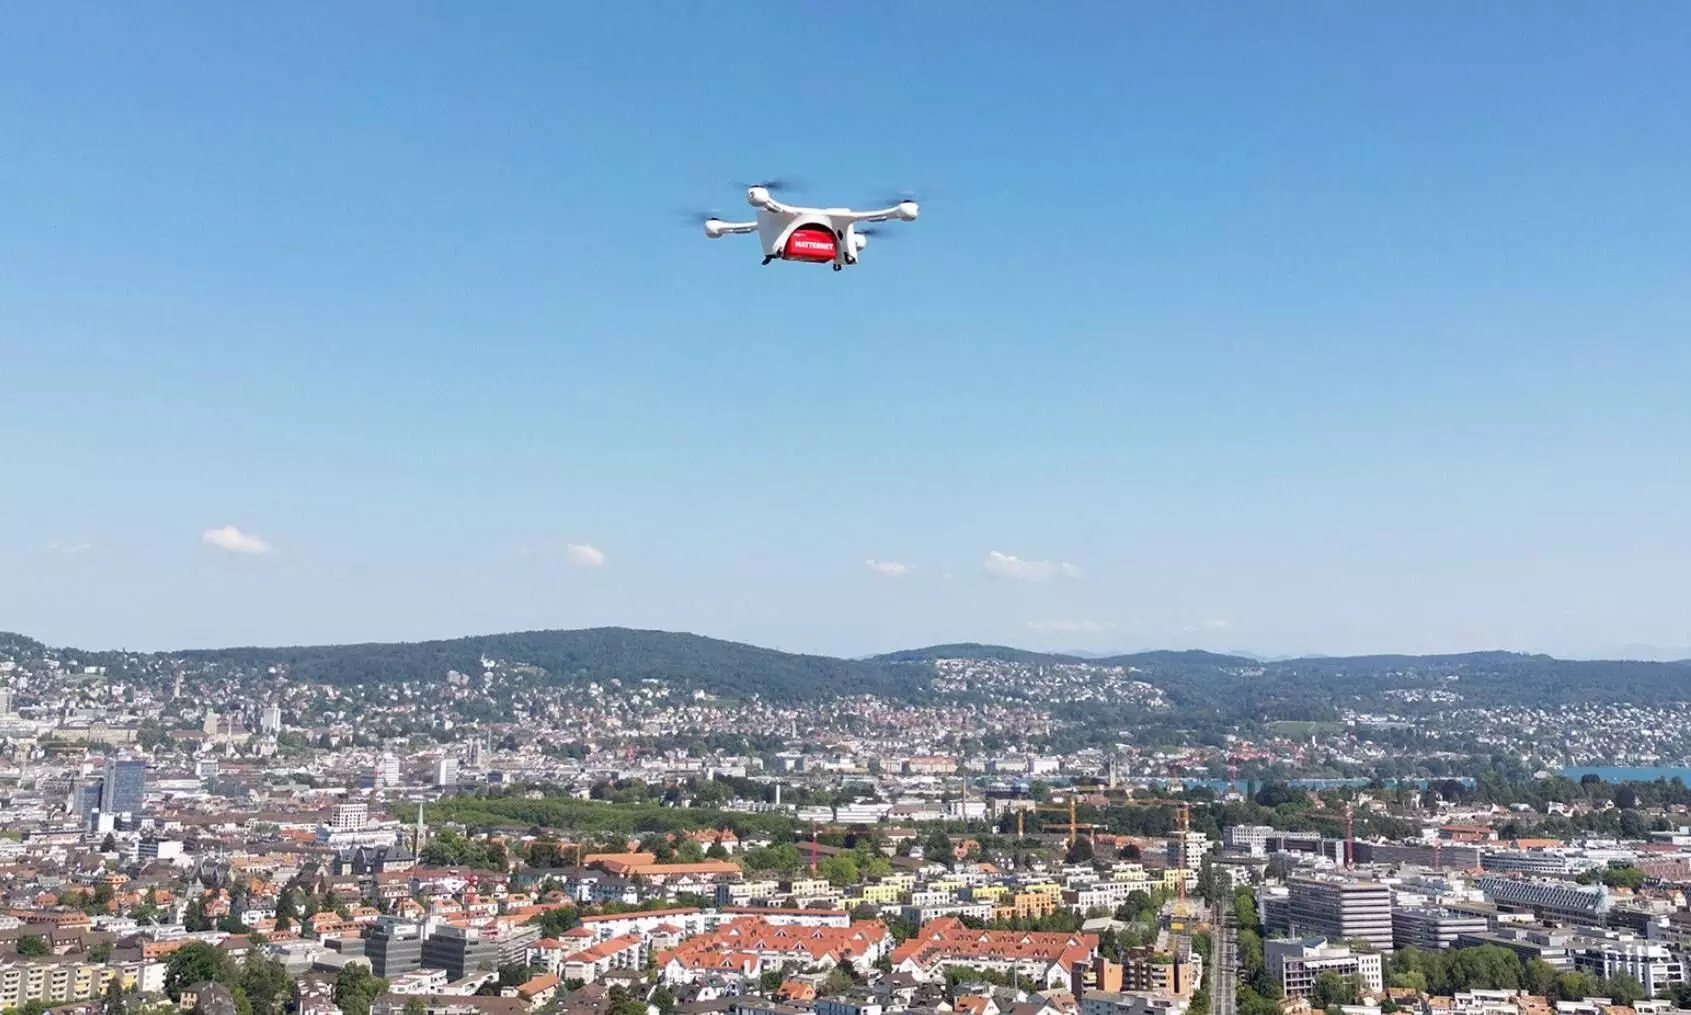 Matternet launches worlds longest urban drone delivery route in Zurich